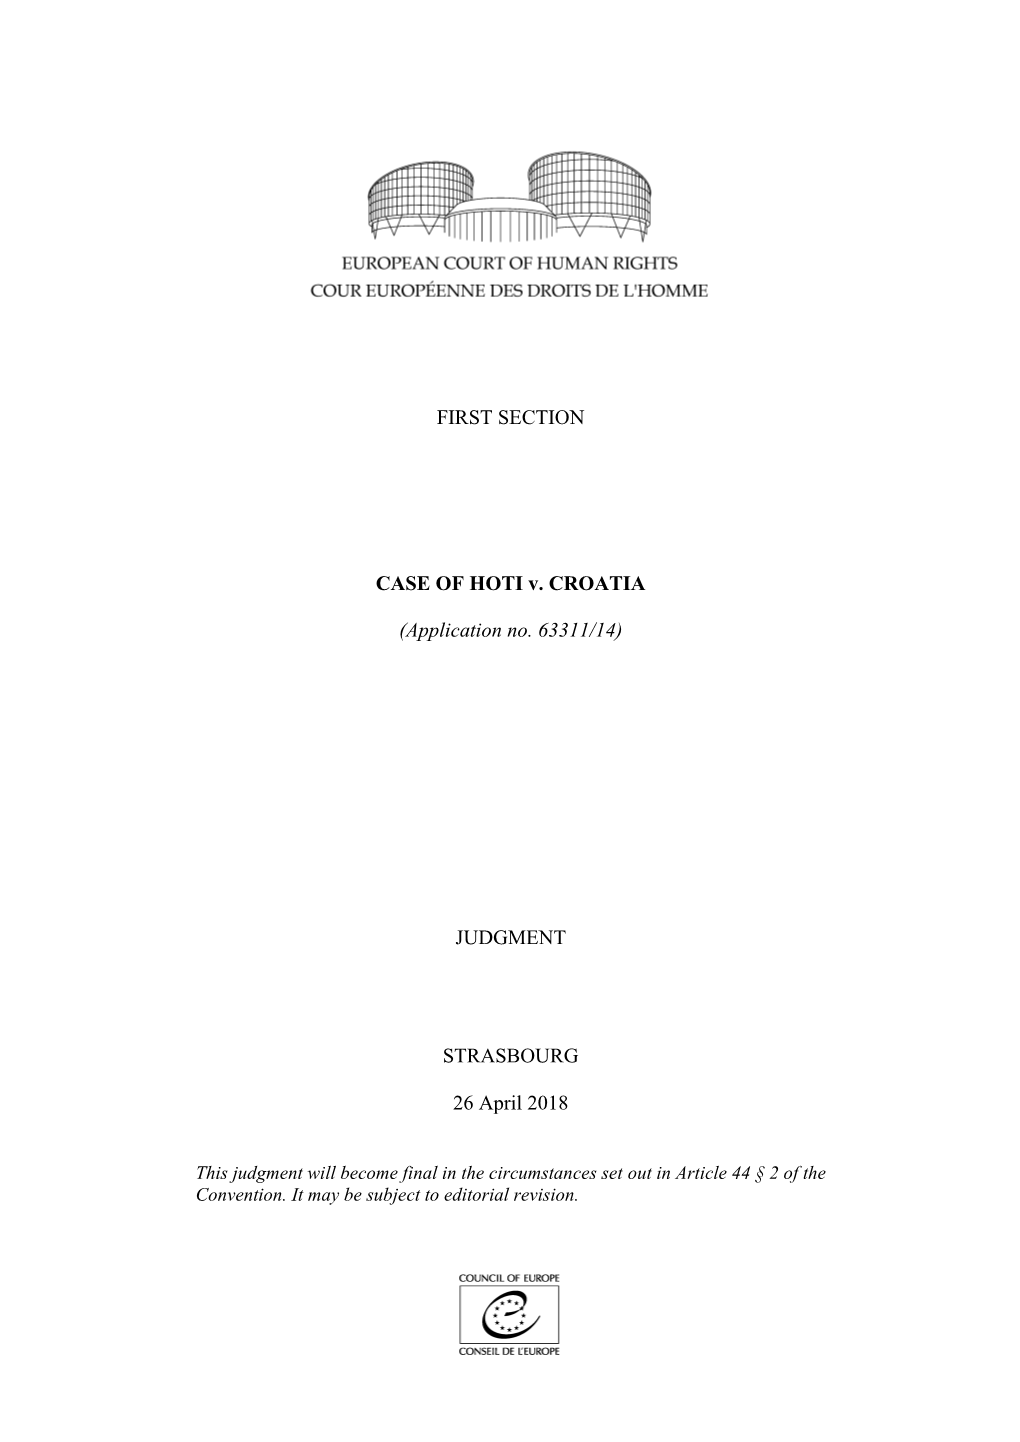 FIRST SECTION CASE of HOTI V. CROATIA